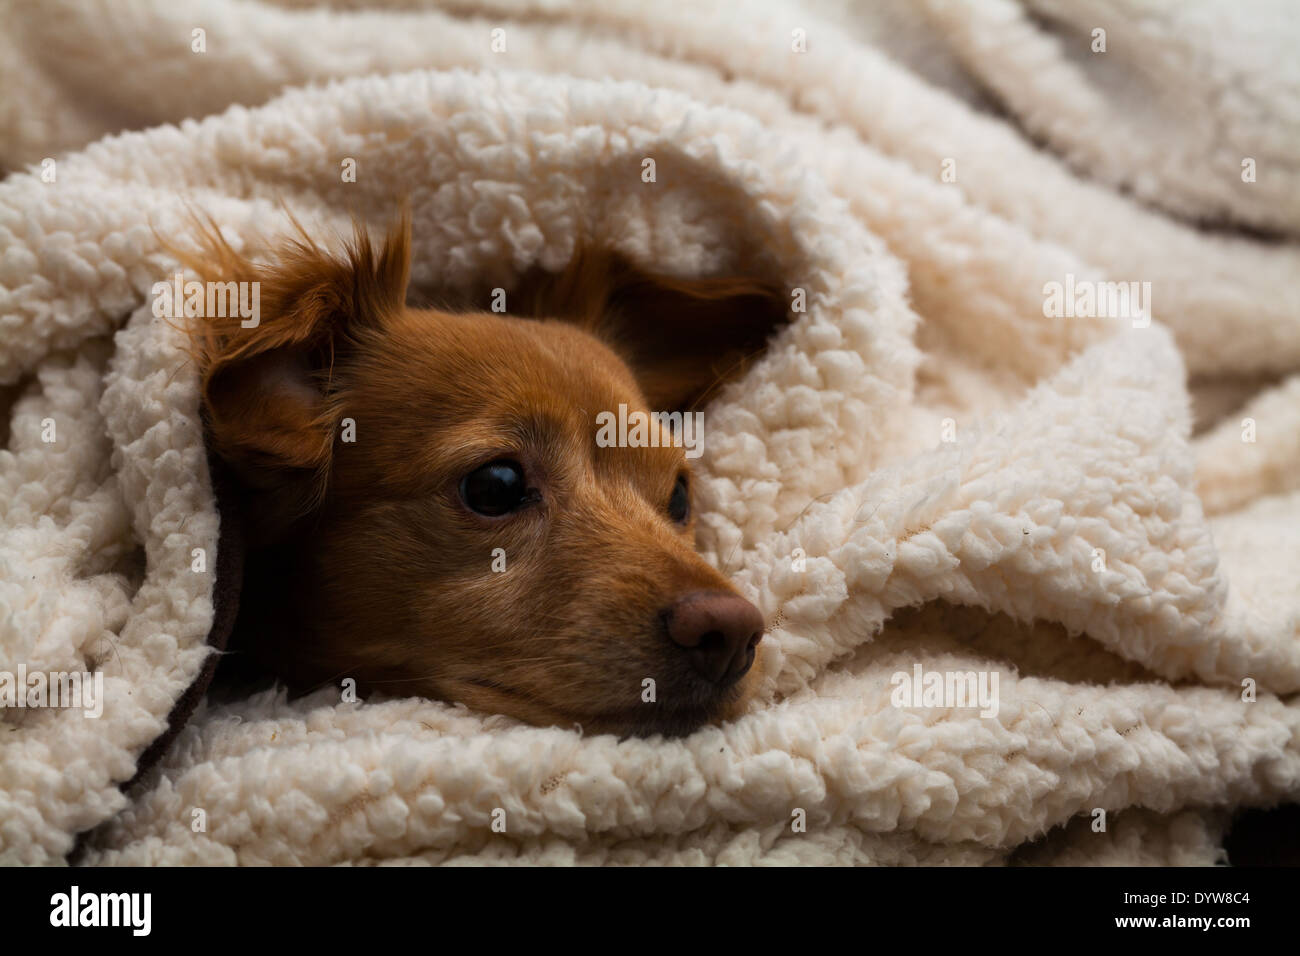 Dog Wrapped In A Blanket High Resolution Stock Photography And Images Alamy